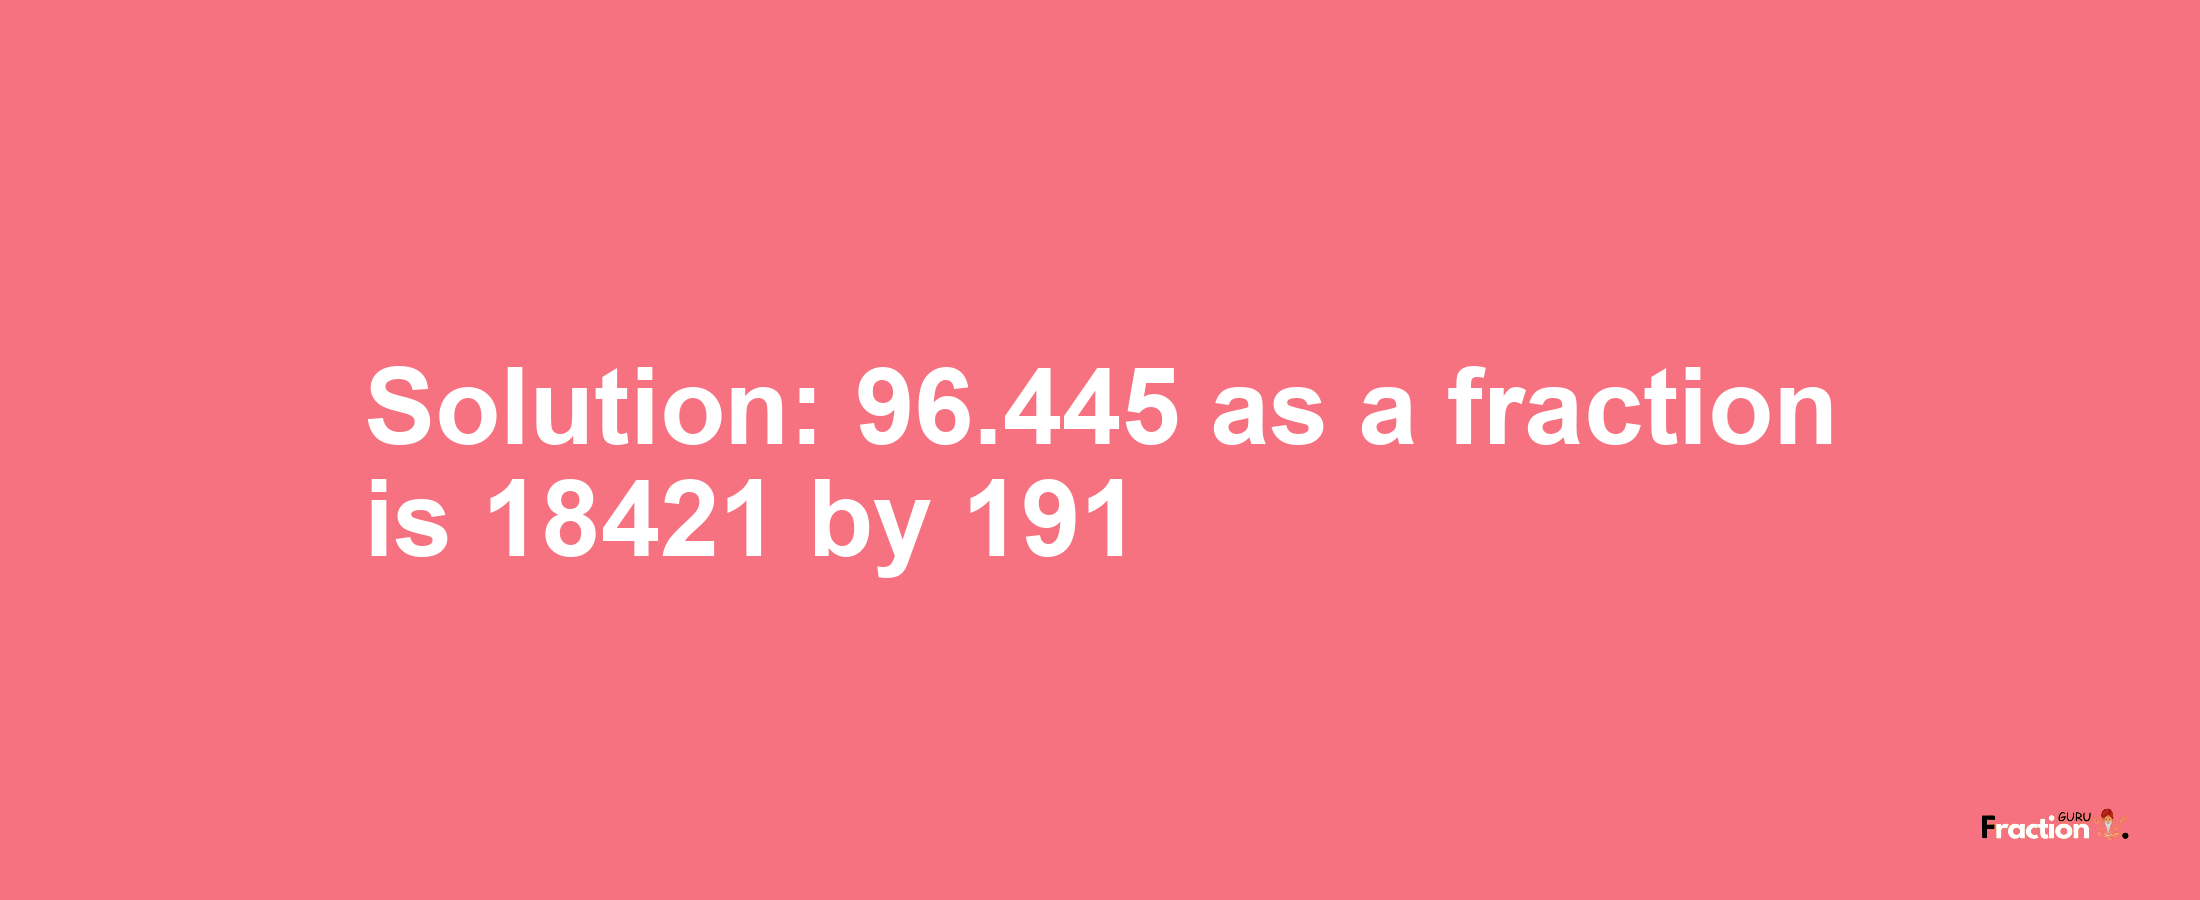 Solution:96.445 as a fraction is 18421/191